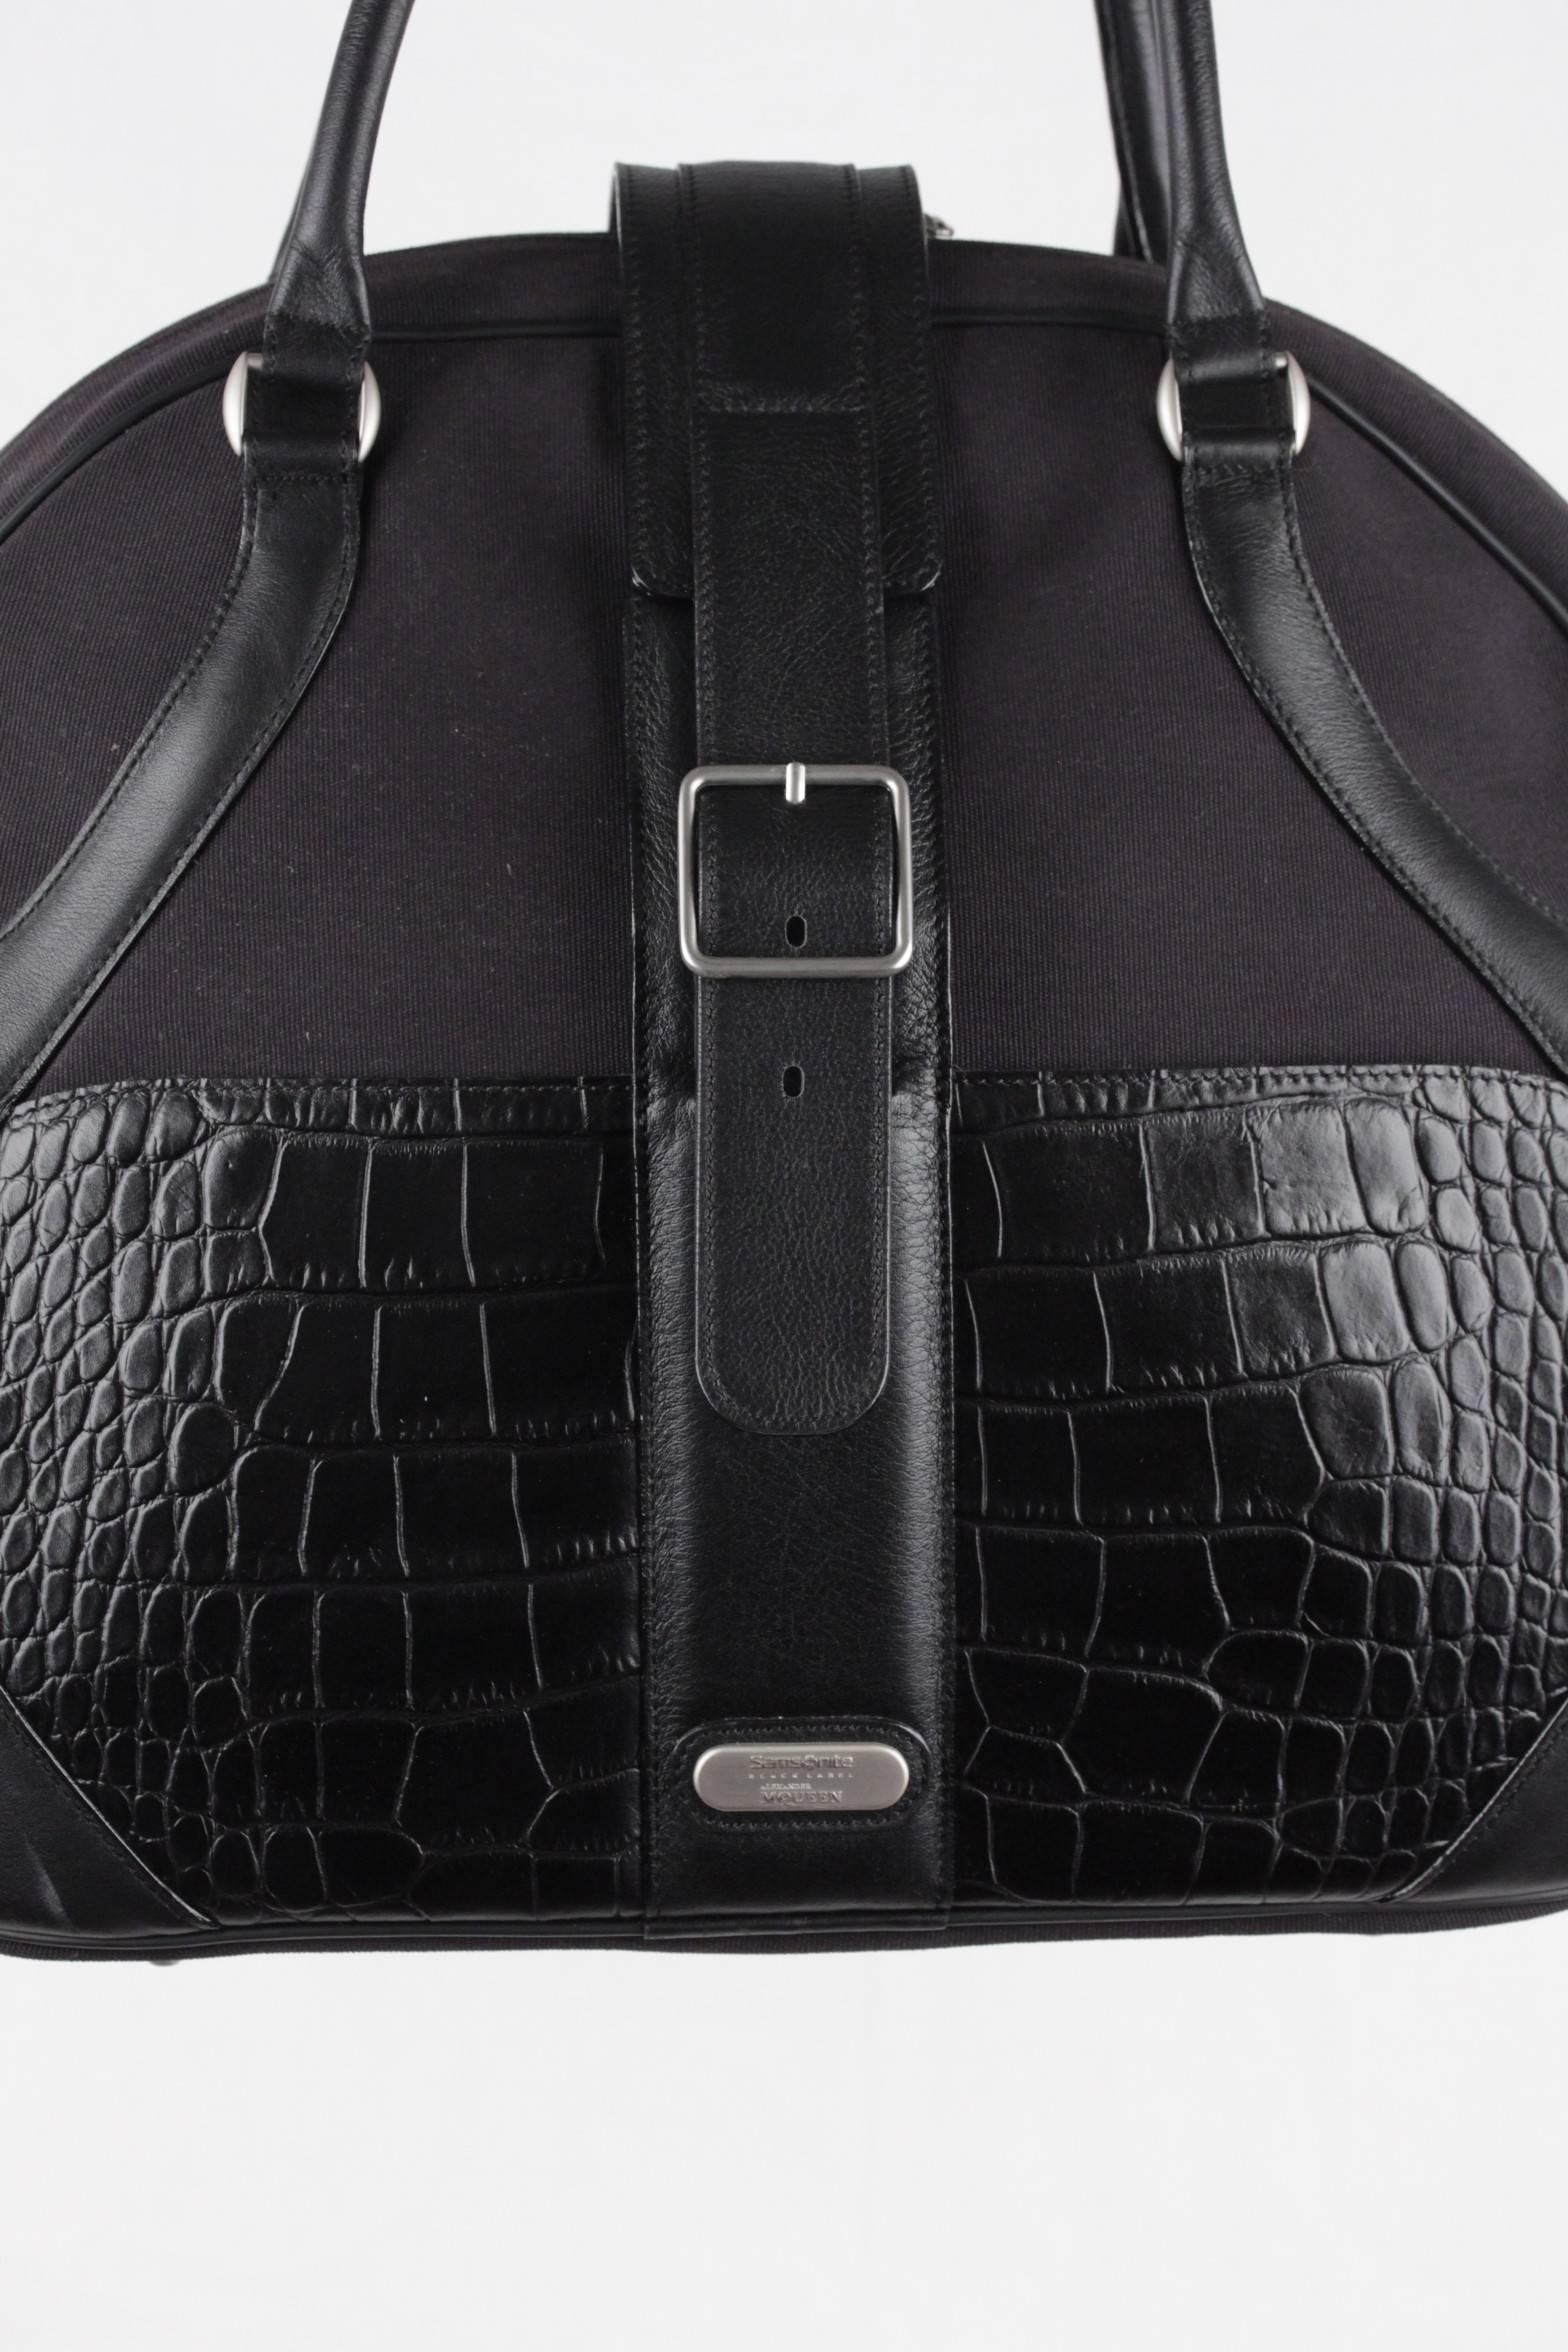  - Soft carry-on bag with unique shape
- Crafted in sturdy canvas and crocodile-embossed leather (cowhide)
- Leather carry handles
- Upper zipper closure + buckle closure
- Feather Print lining
- Inside zipper compartment and 2 open